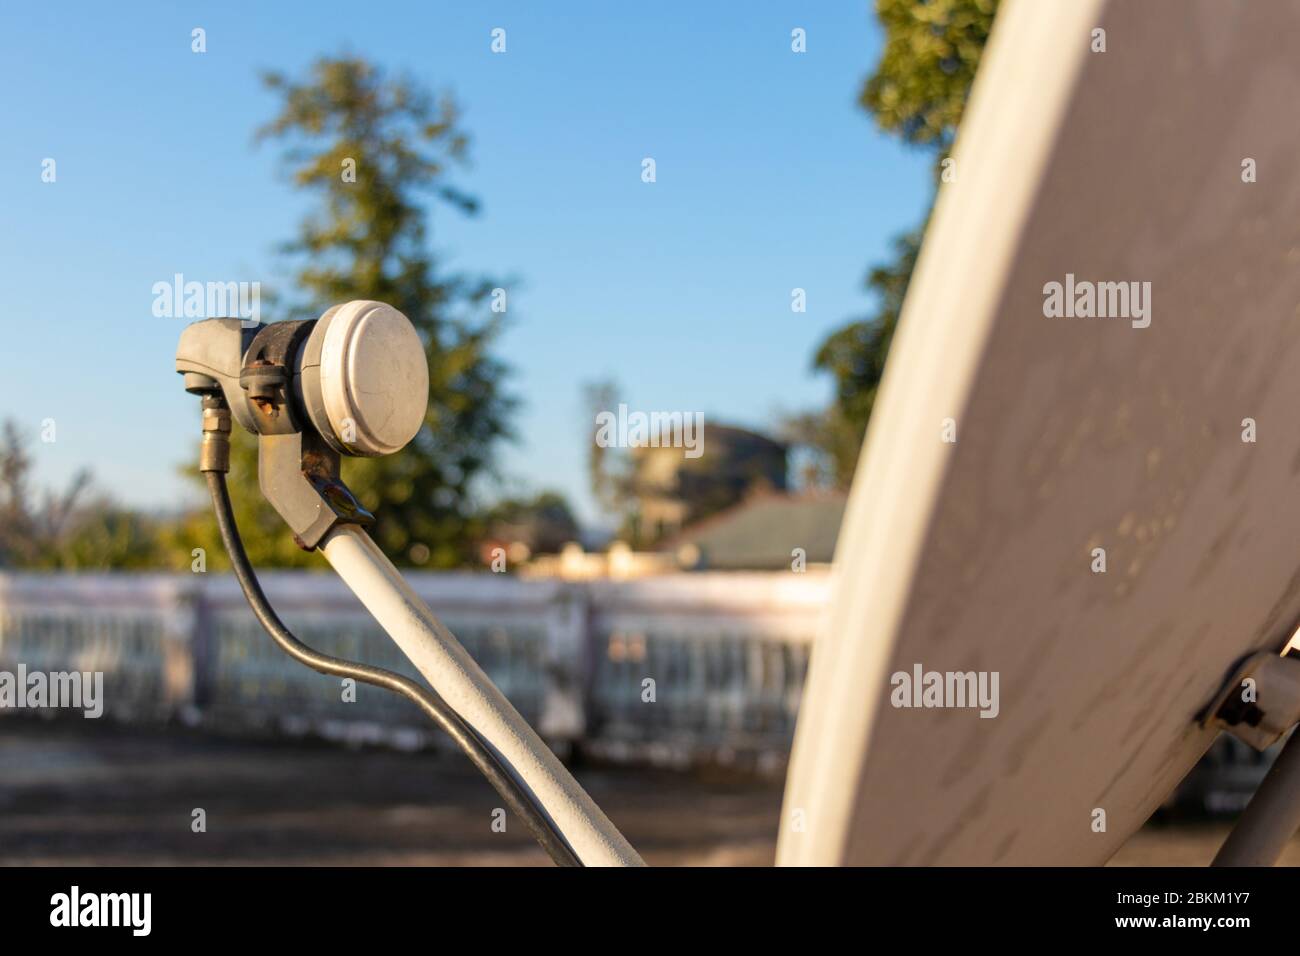 LNB, Satellite Dish over the blue sky in background, selective focus. Stock Photo